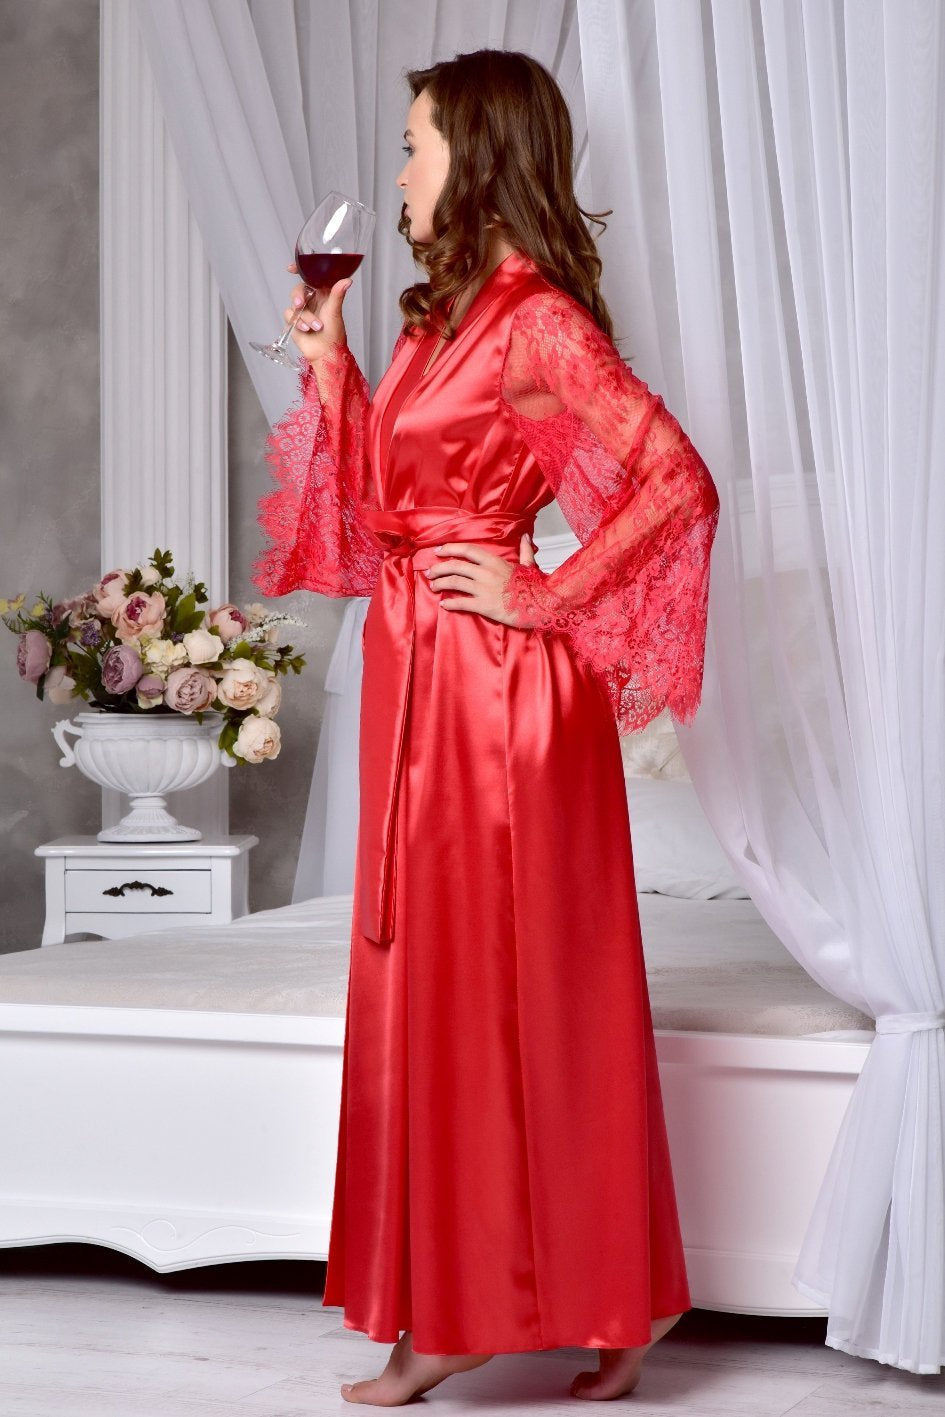 Lace Sleeve Bridal Robe in Red - Wedding and Bachelorette Attire